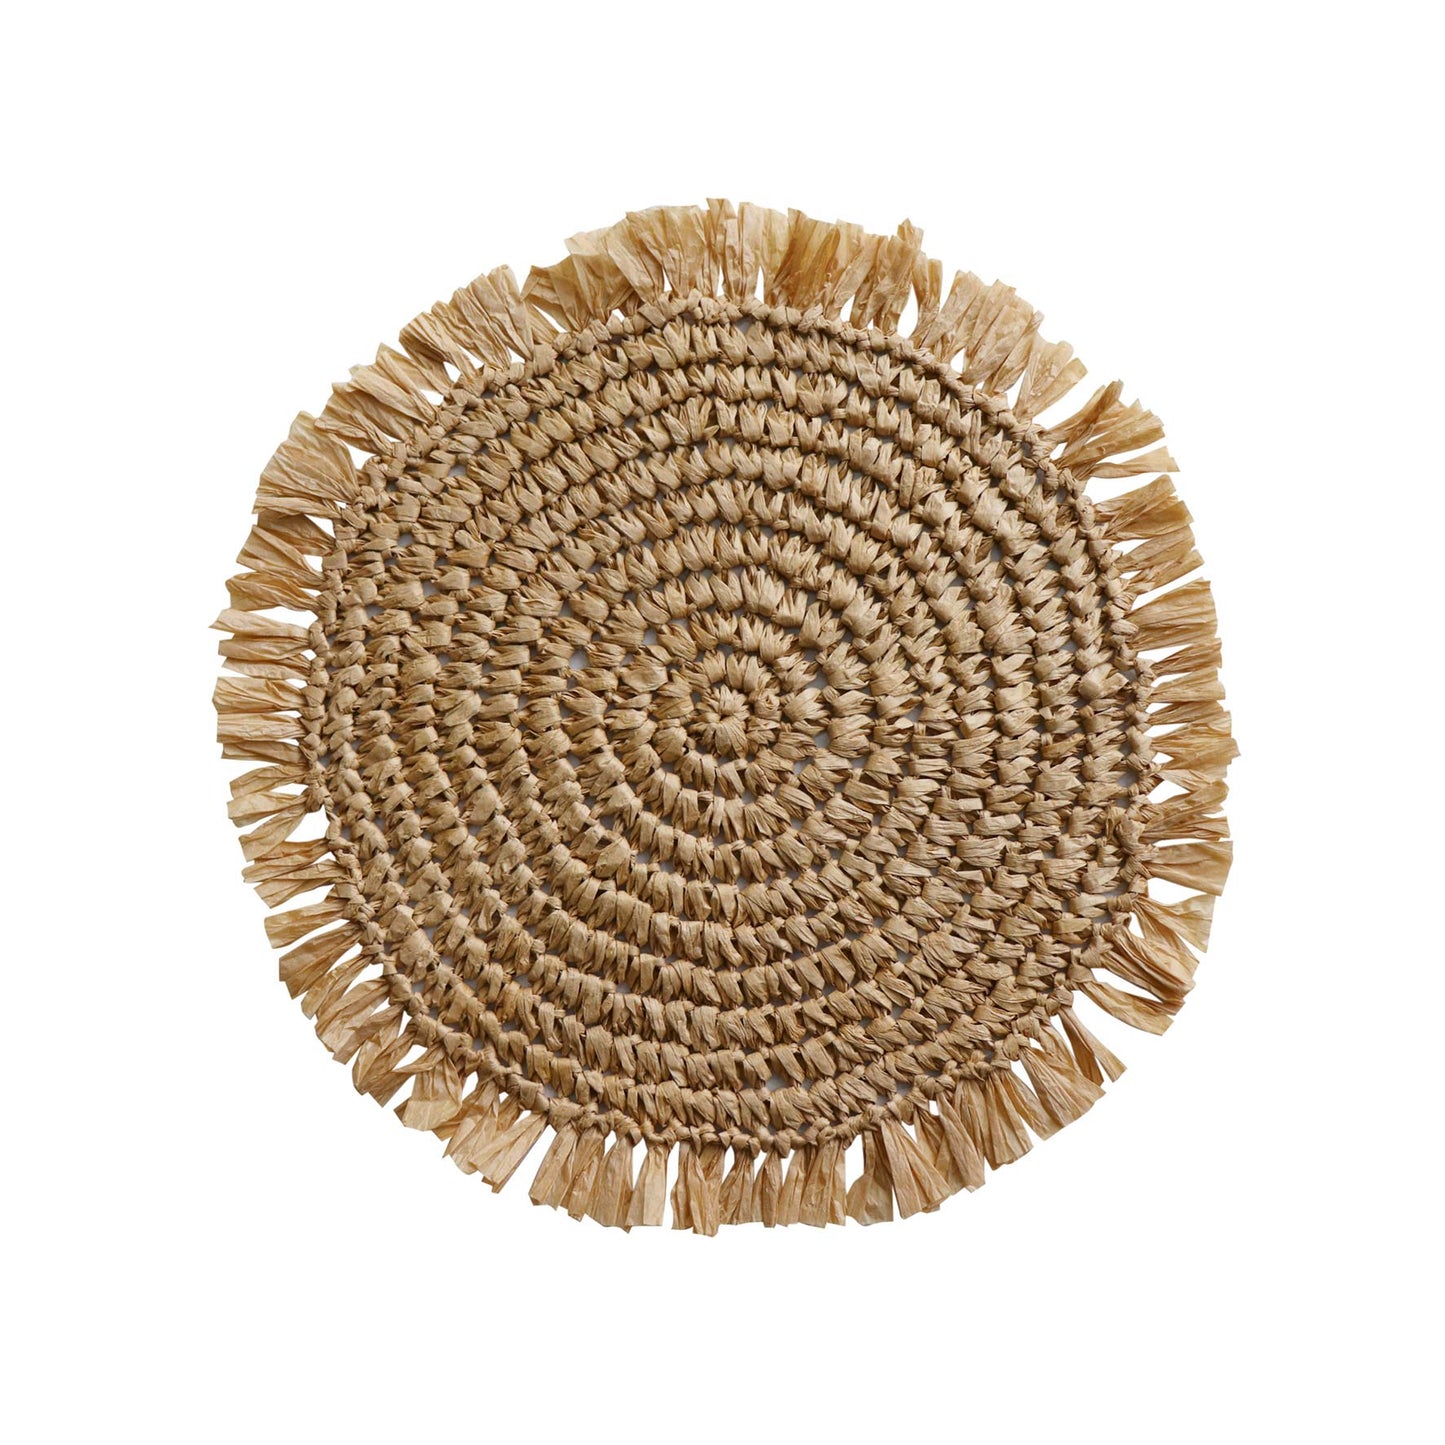 Fringed Round Placemat - Natural - Madras Link